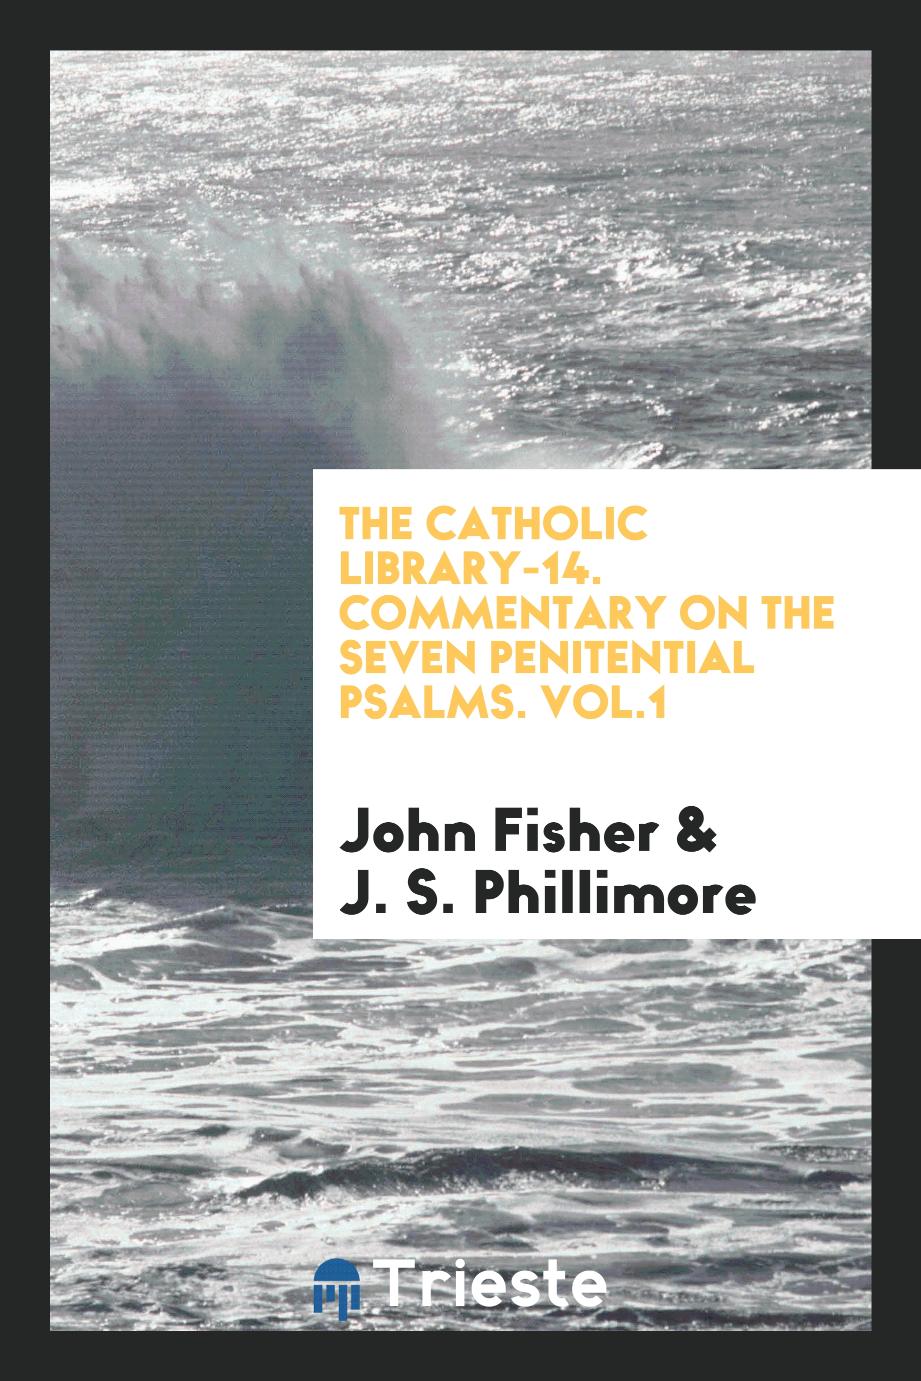 The Catholic Library-14. Commentary on the seven penitential psalms. Vol.1